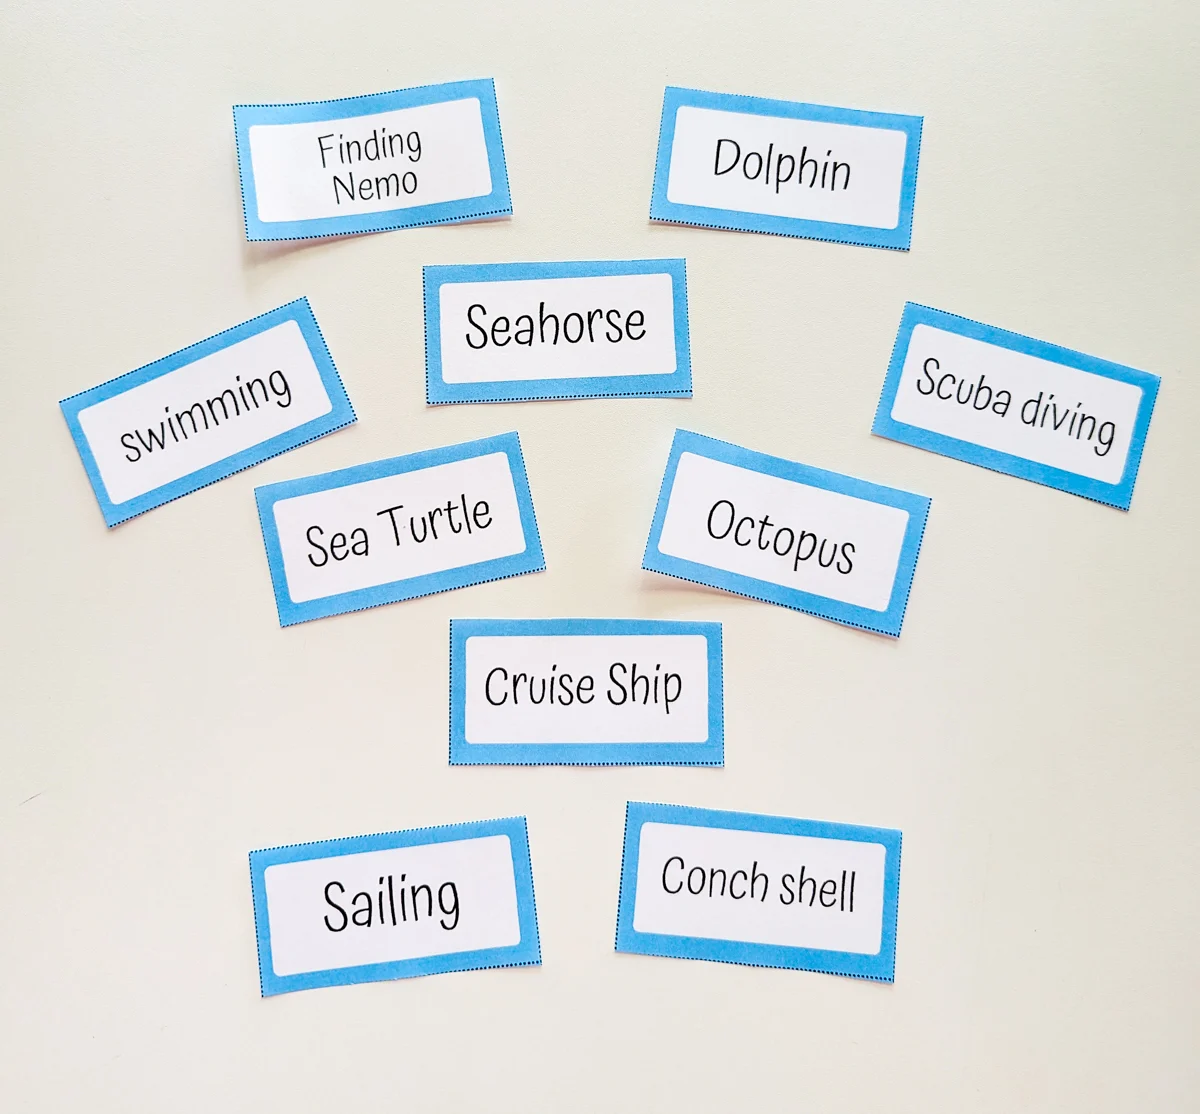 Ten word cards individually cut out from ocean charades game and spread out on white table.